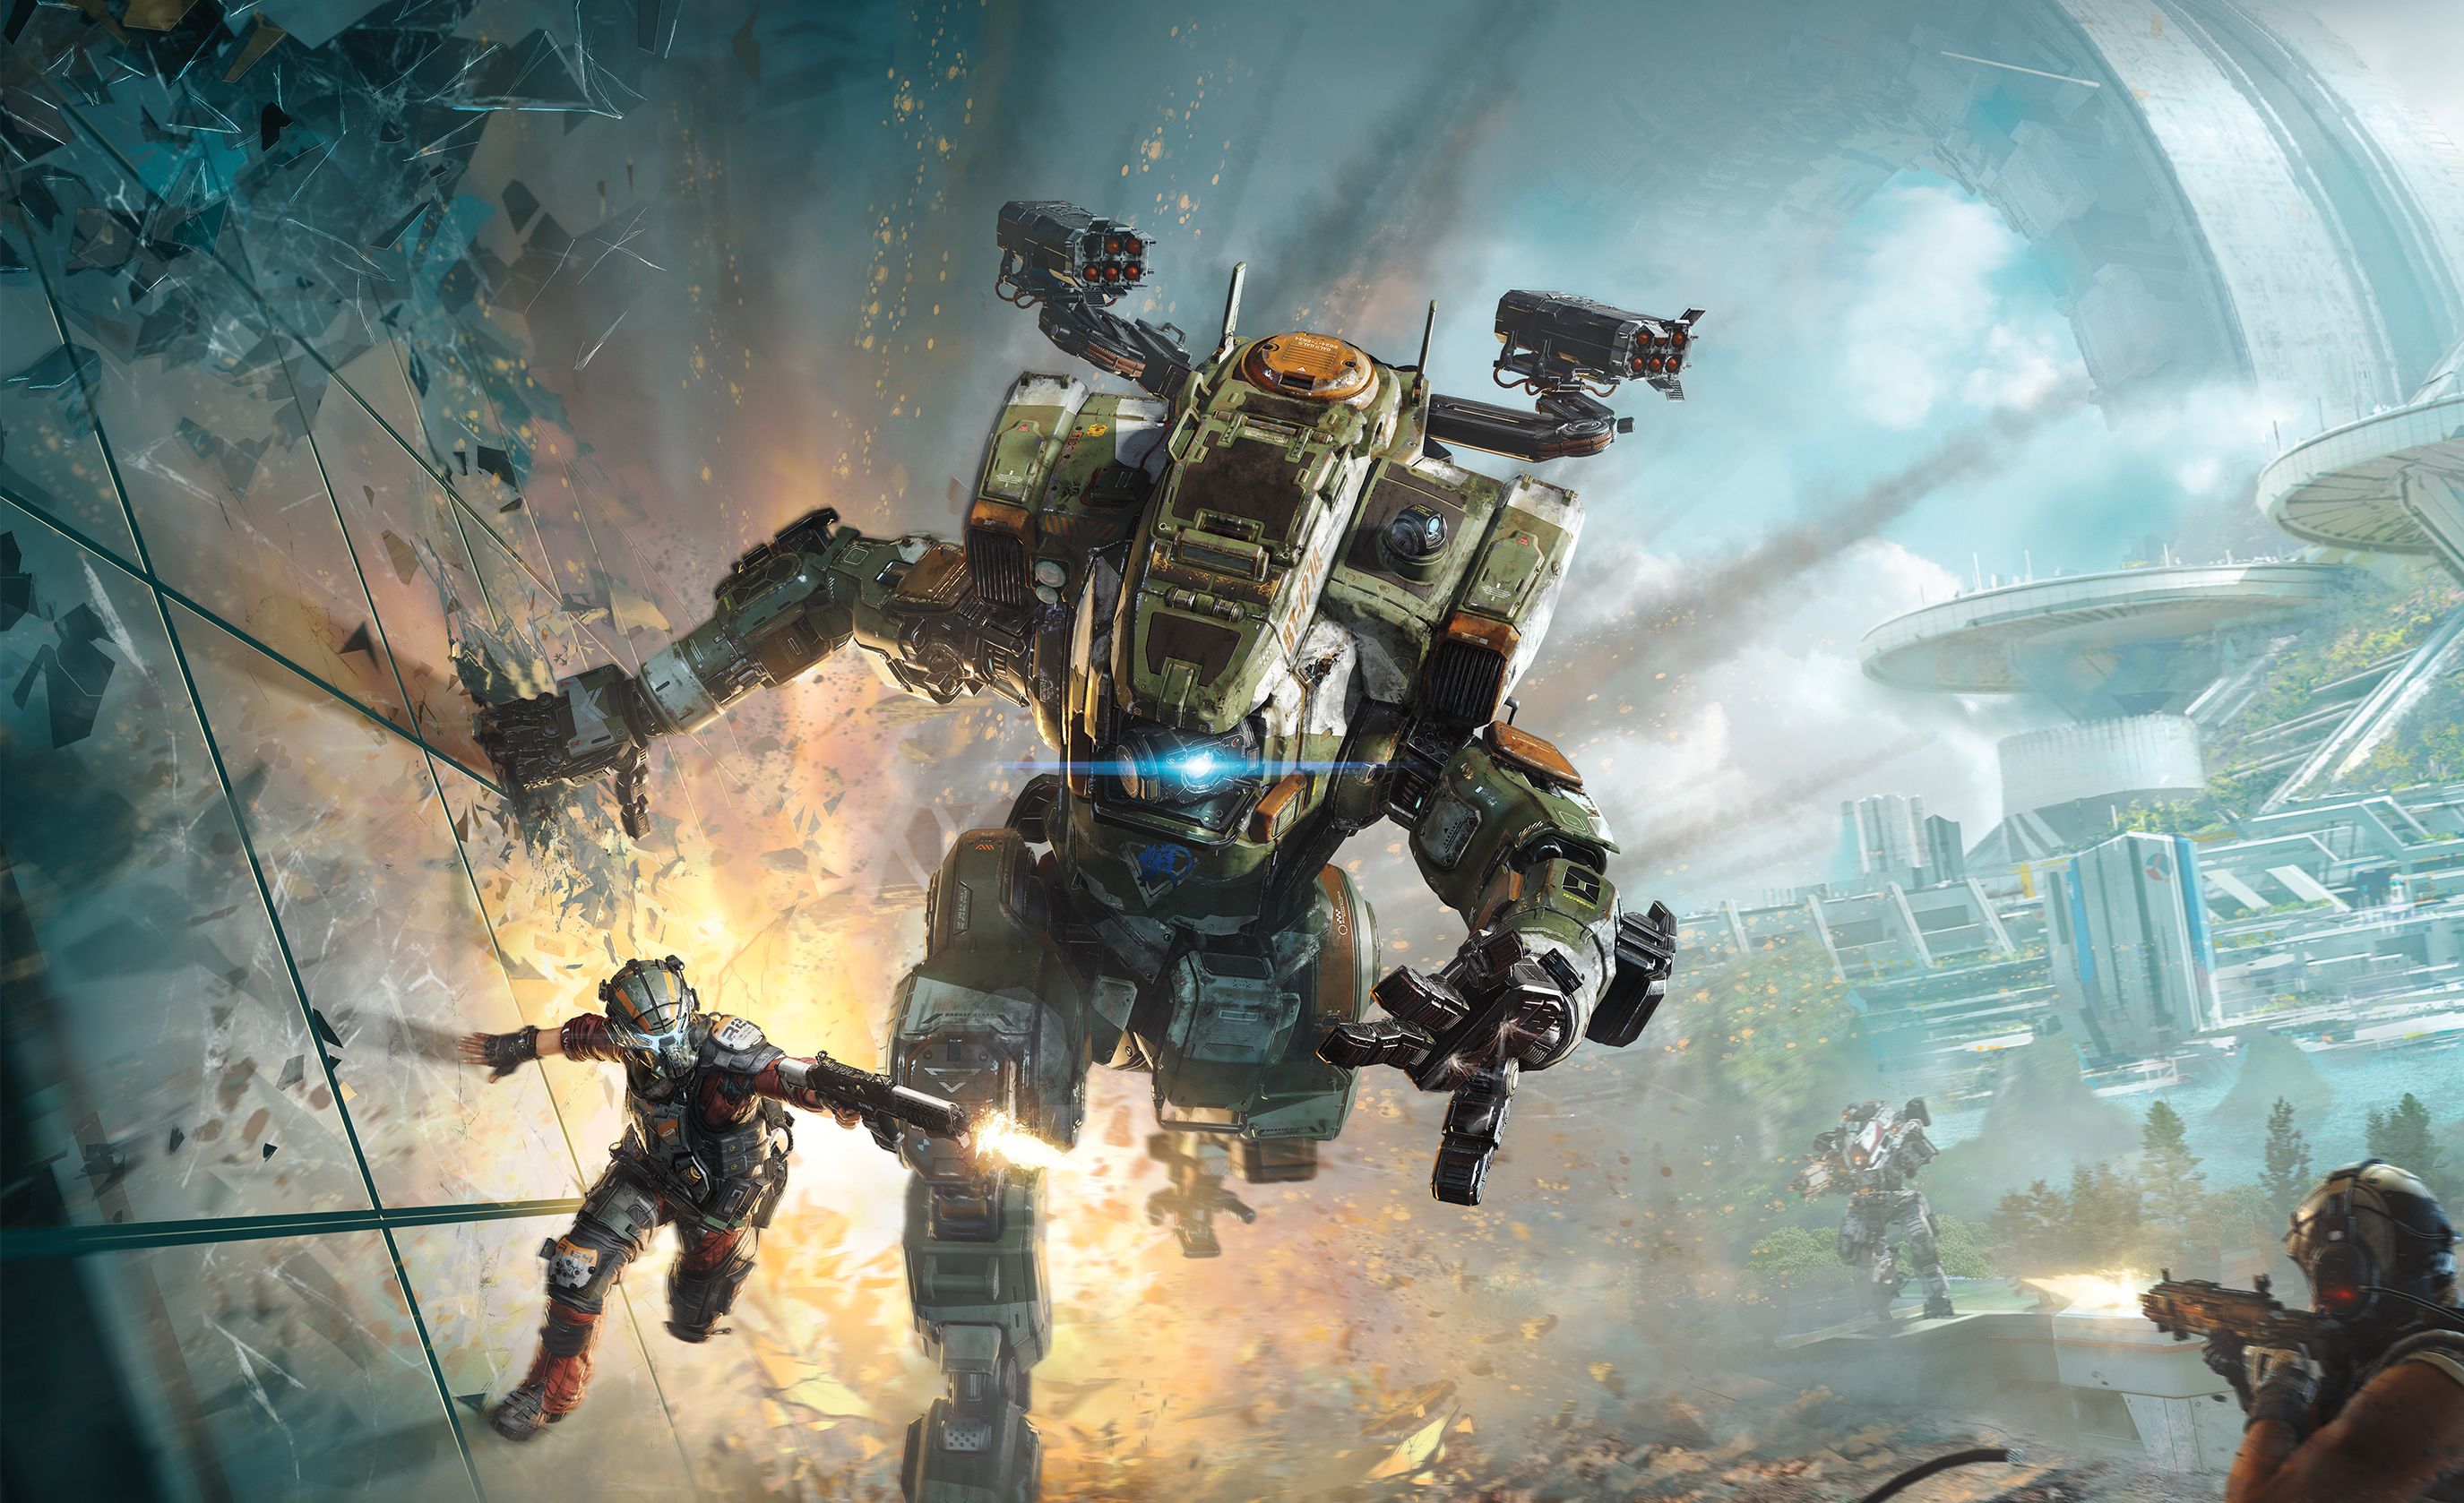 EA has canceled another game and it was a single-player Titanfall title - report